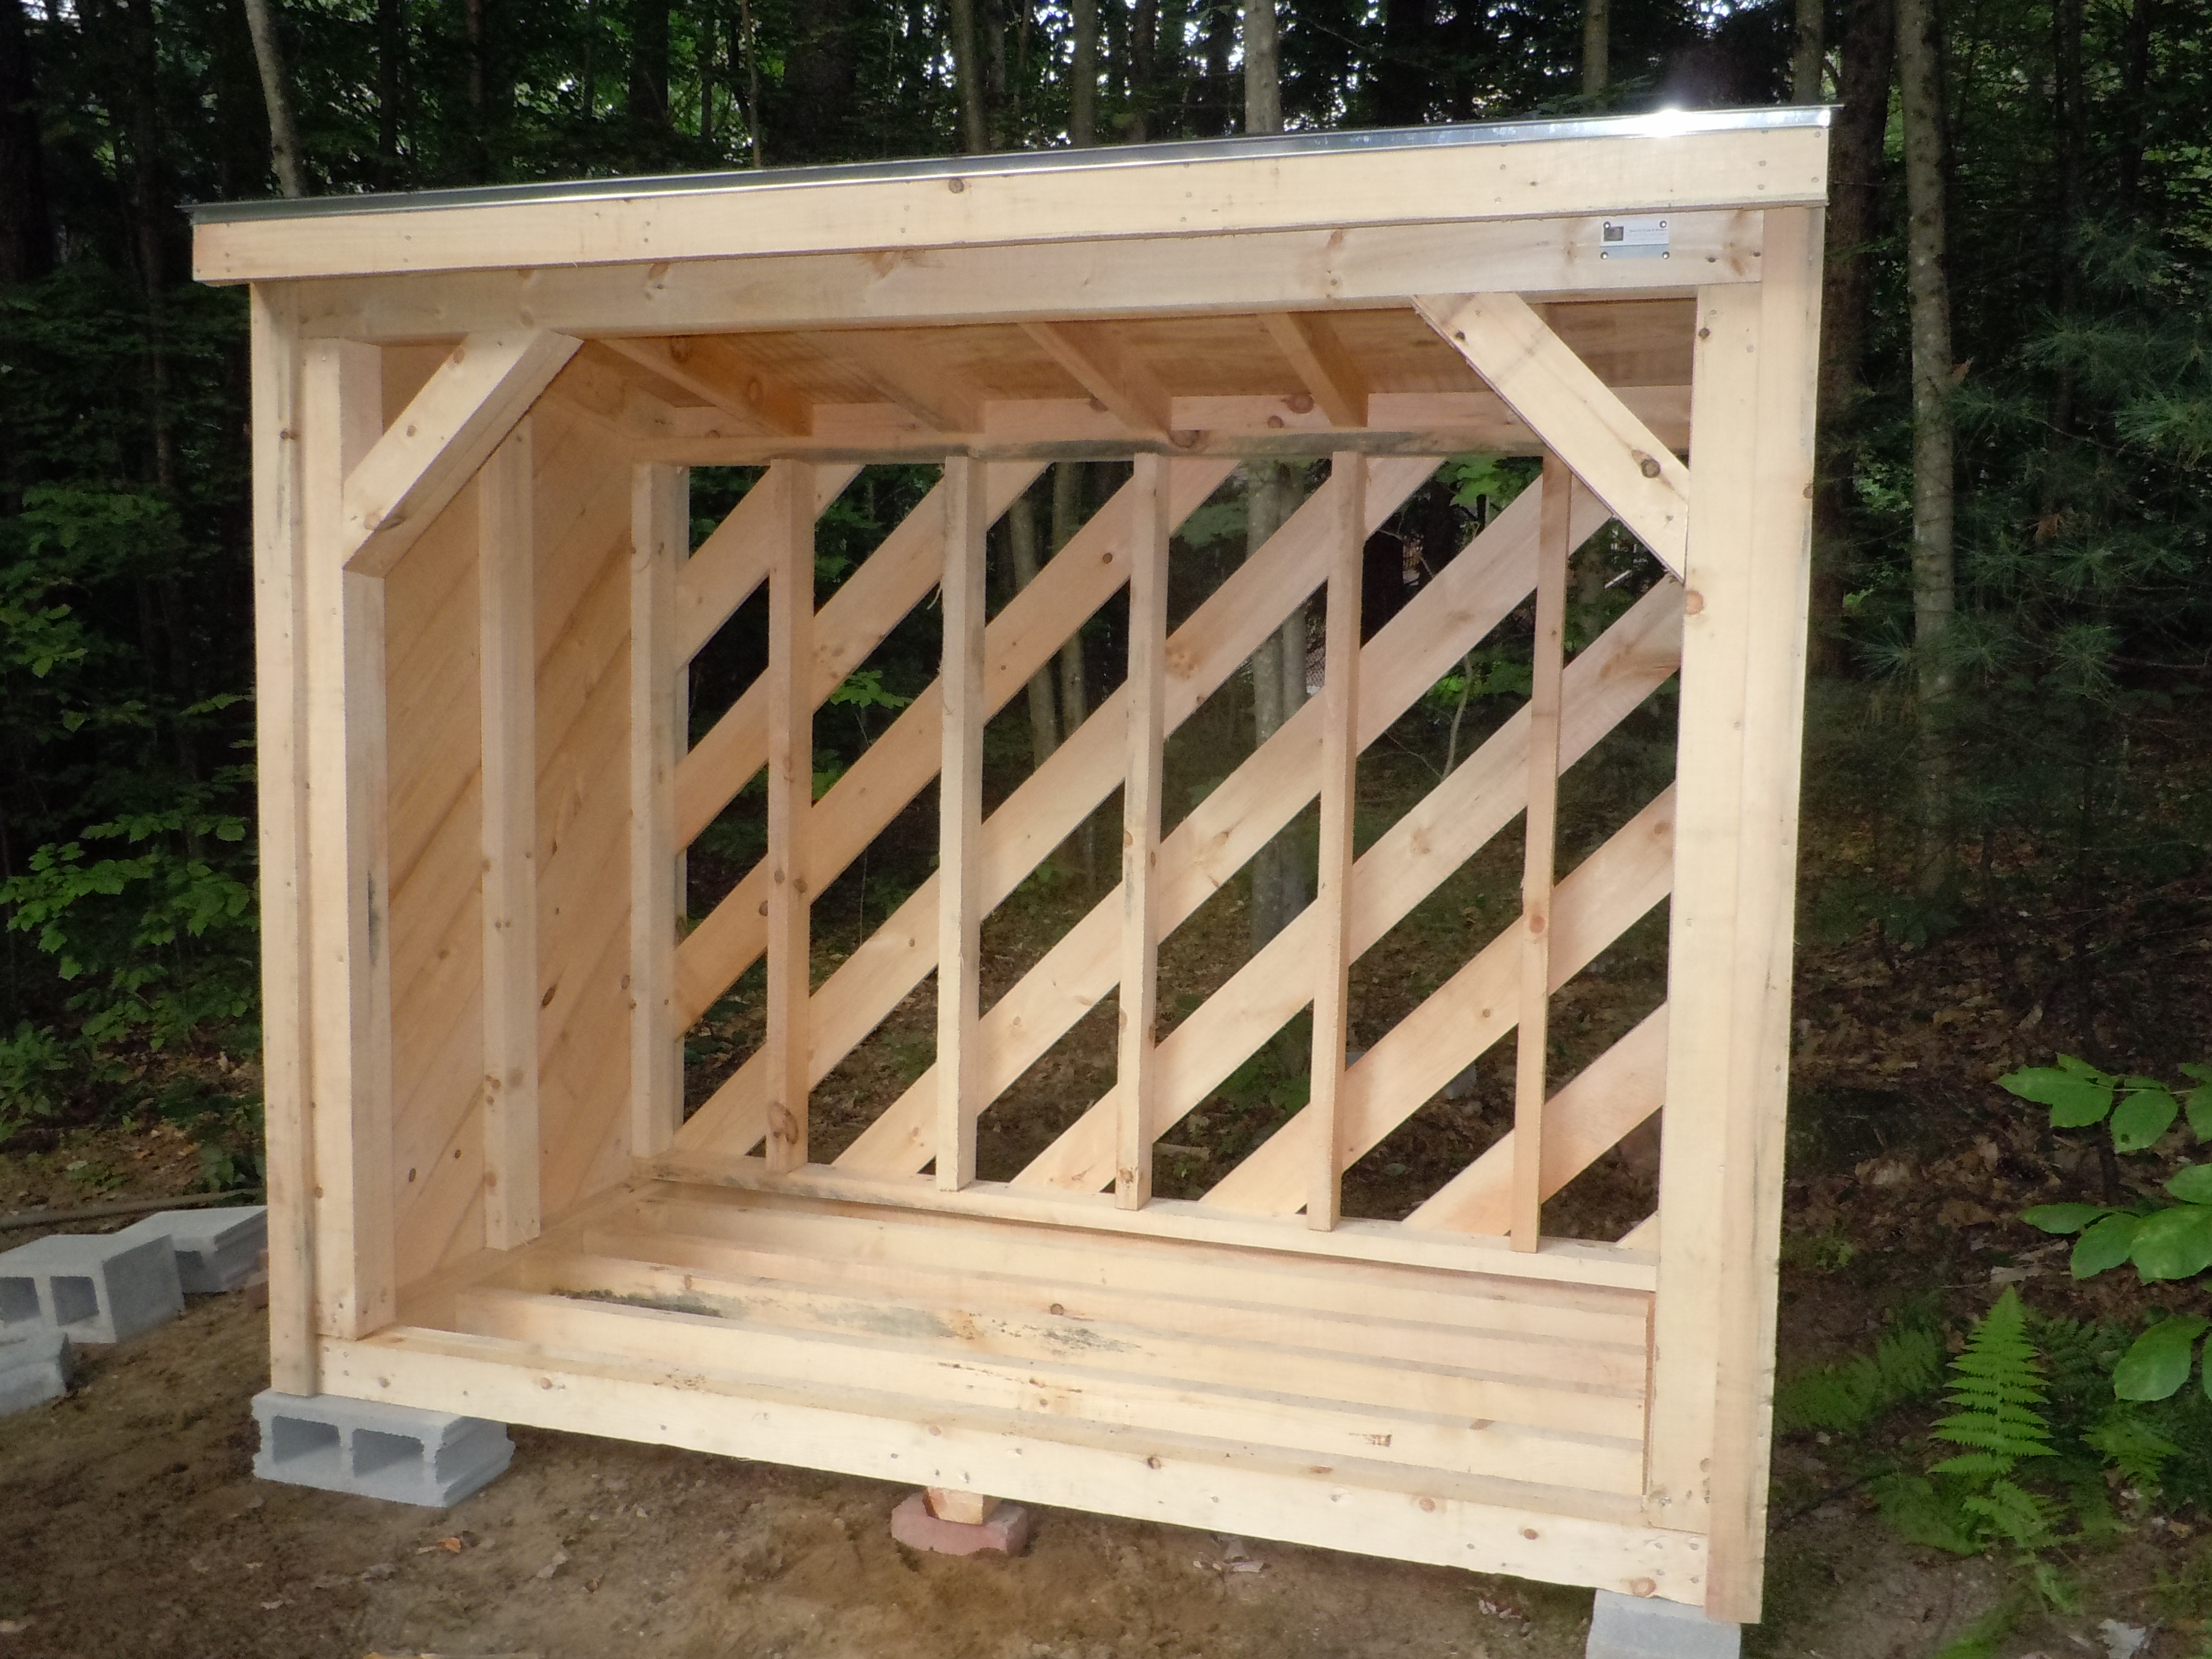 Build wood shed to hold 4 cords wood
